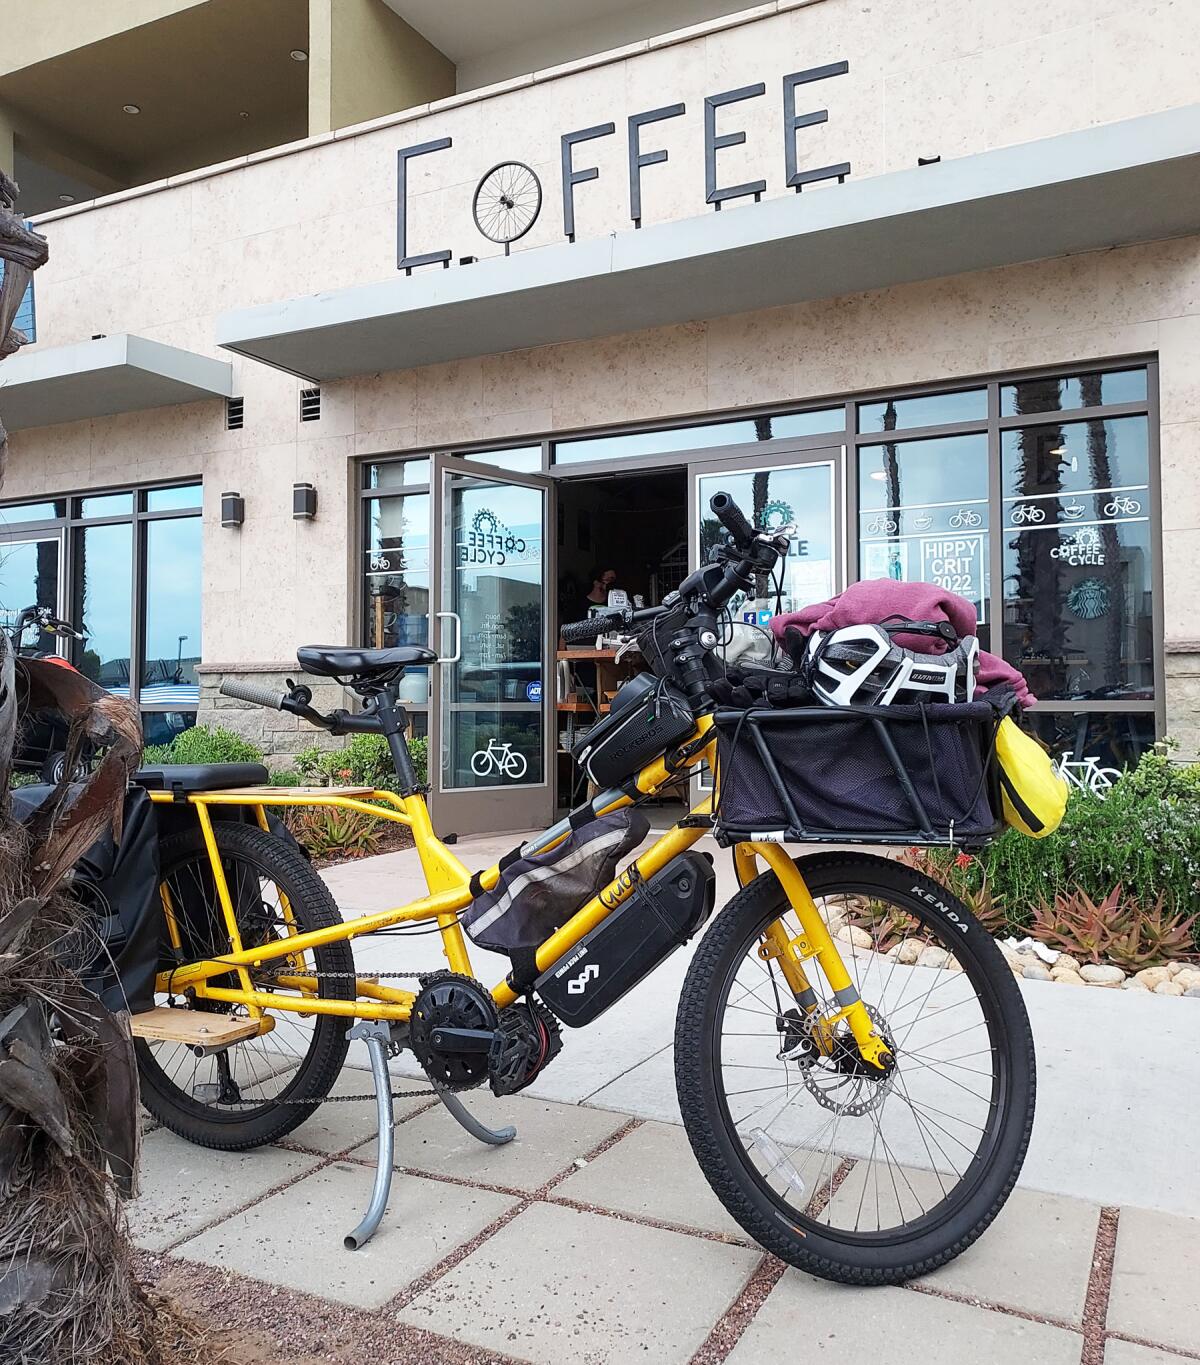 Bicycles will often be found parked in front of Coffee Cycle in Pacific Beach.